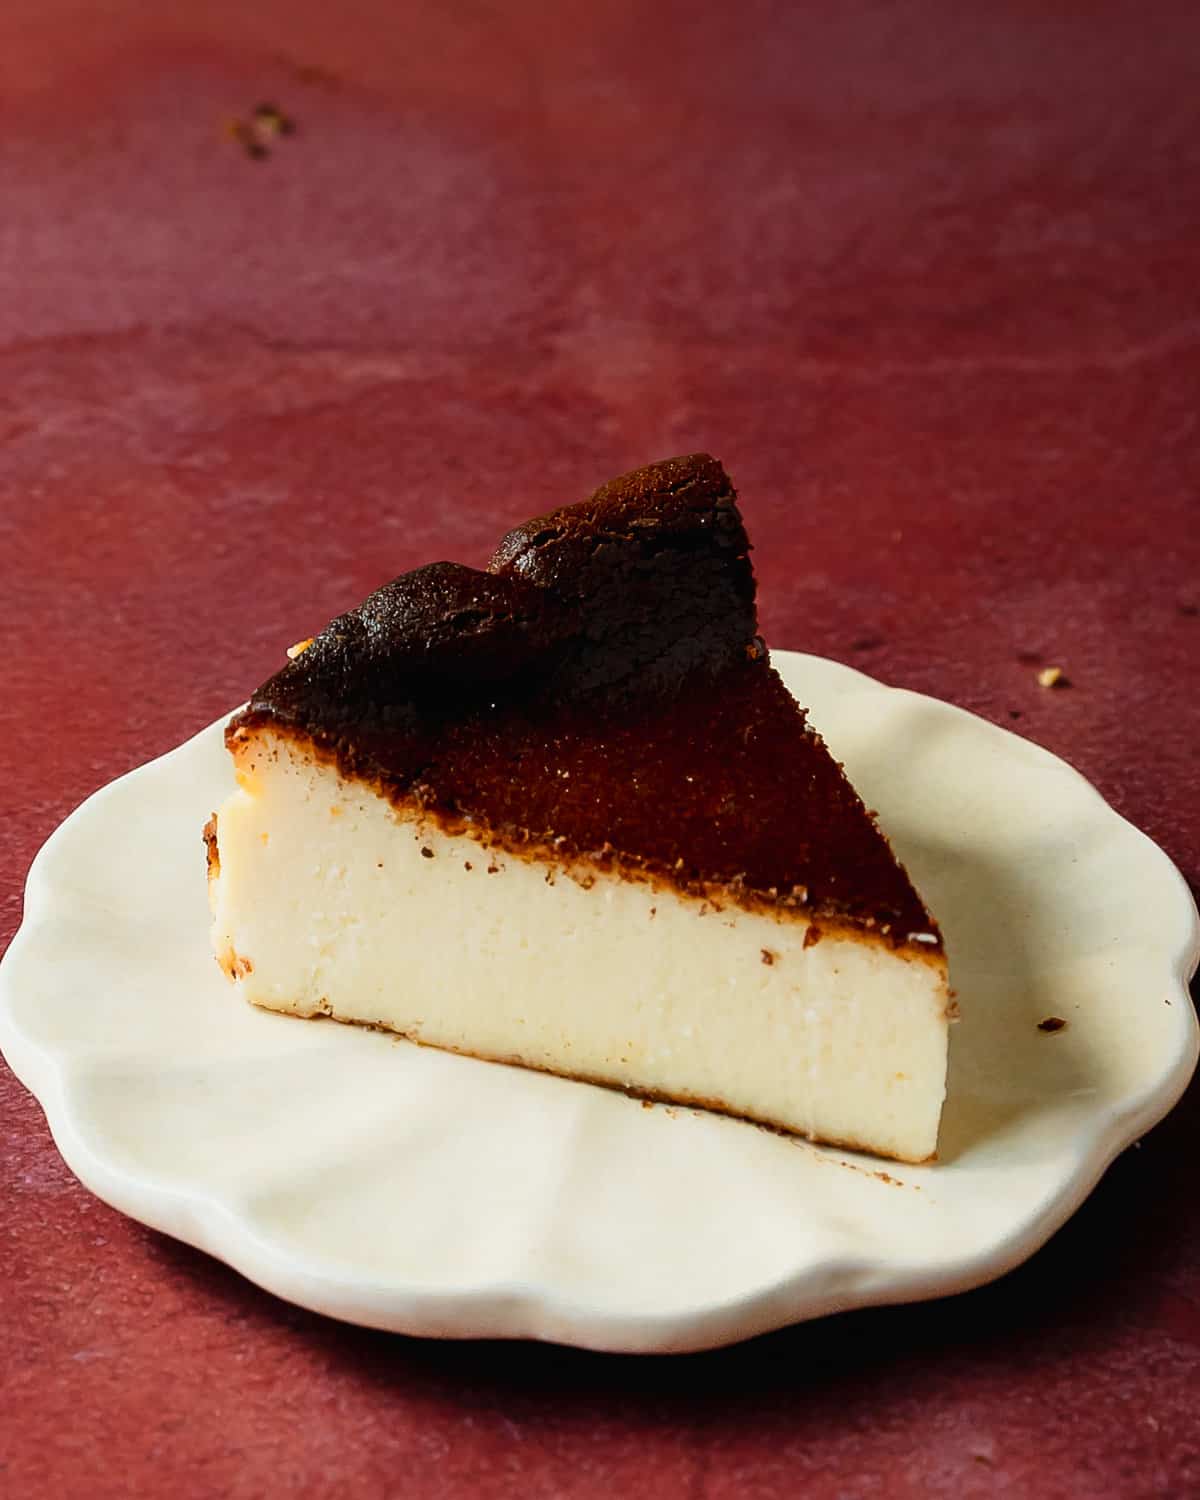 San Sebastian cheesecake has a beautifully caramelized burnt crust with a smooth, rich and creamy center. This traditional Spanish Basque cheesecake is easy to make and creates a stunning and decadent dessert everyone will love. 